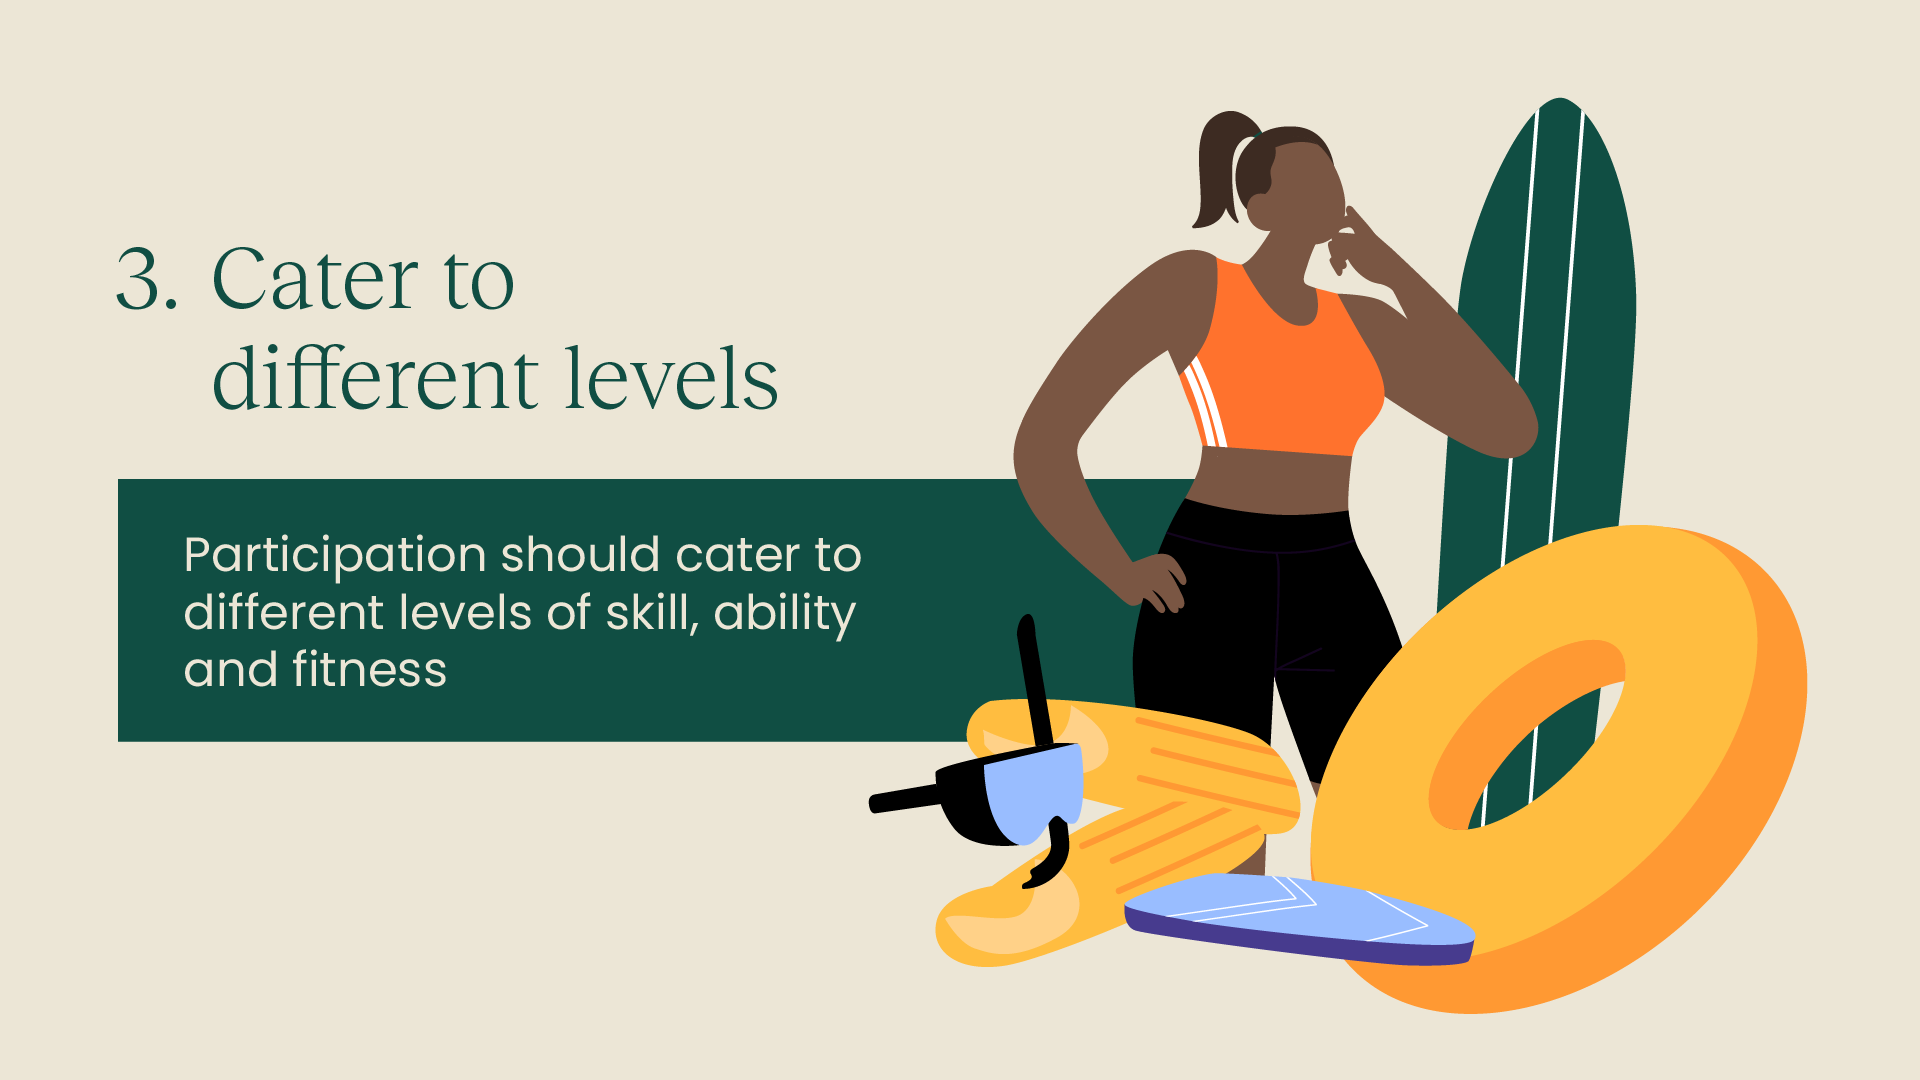 3. Cater to different levels: Participation should cater to different levels of skill, ability and fitness